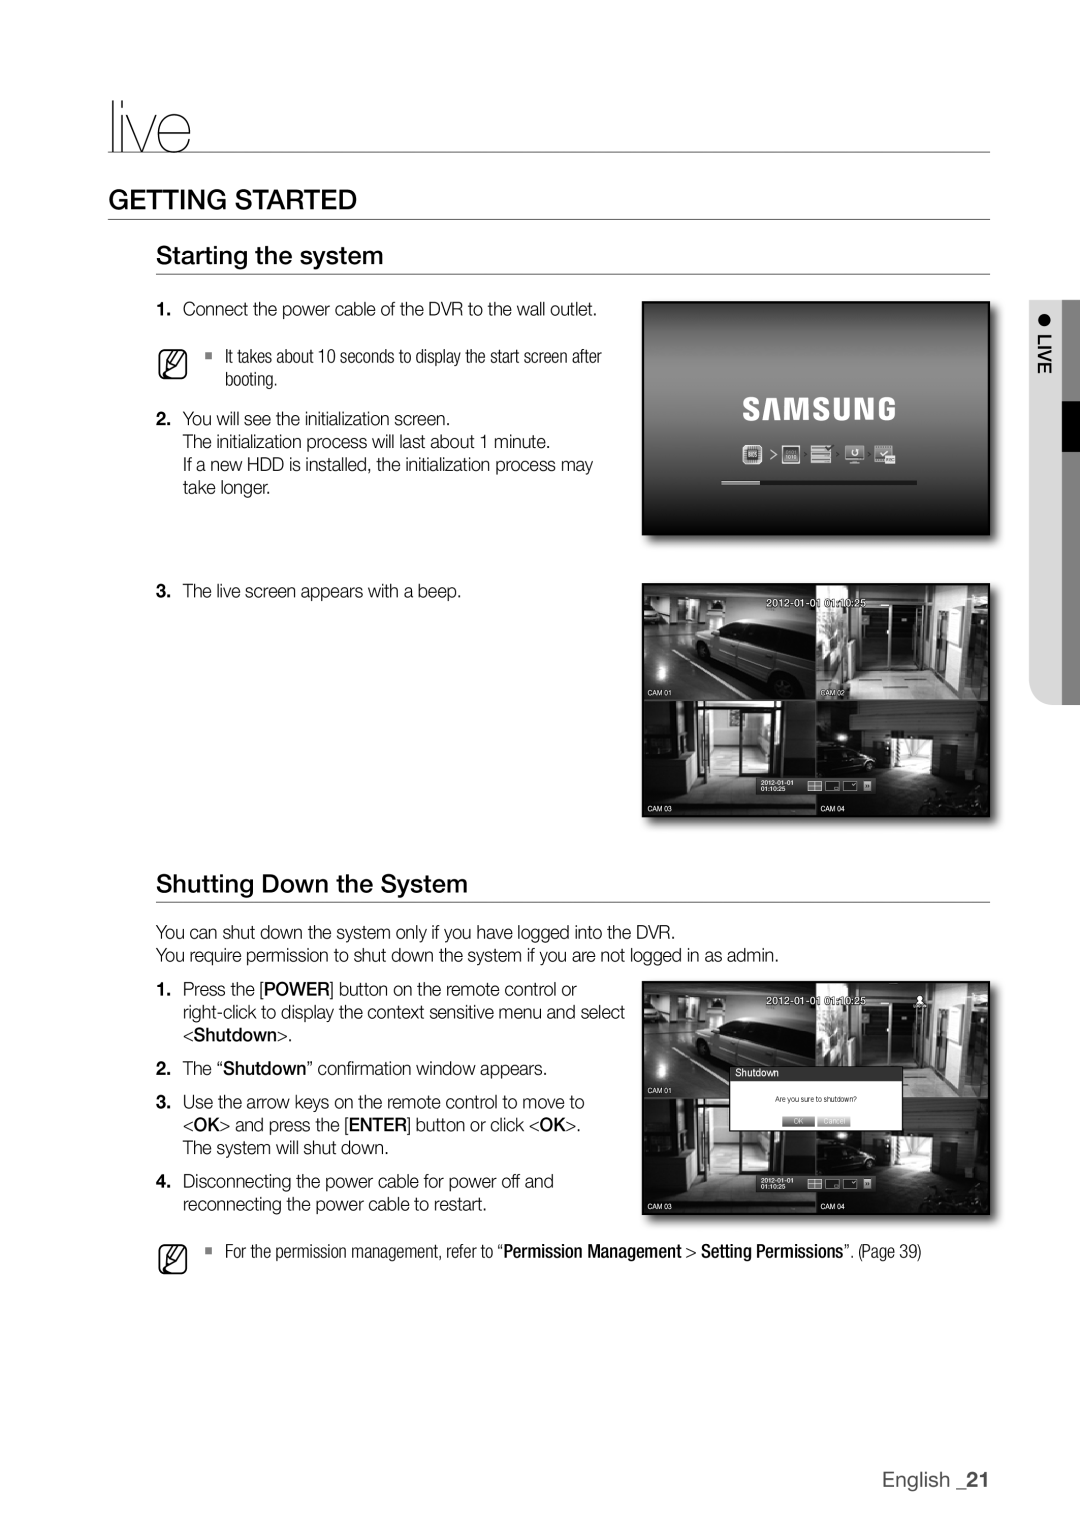 Samsung SDR3100 user manual live, GeTTinG STArTed, Starting the system, Shutting down the System, English _21 